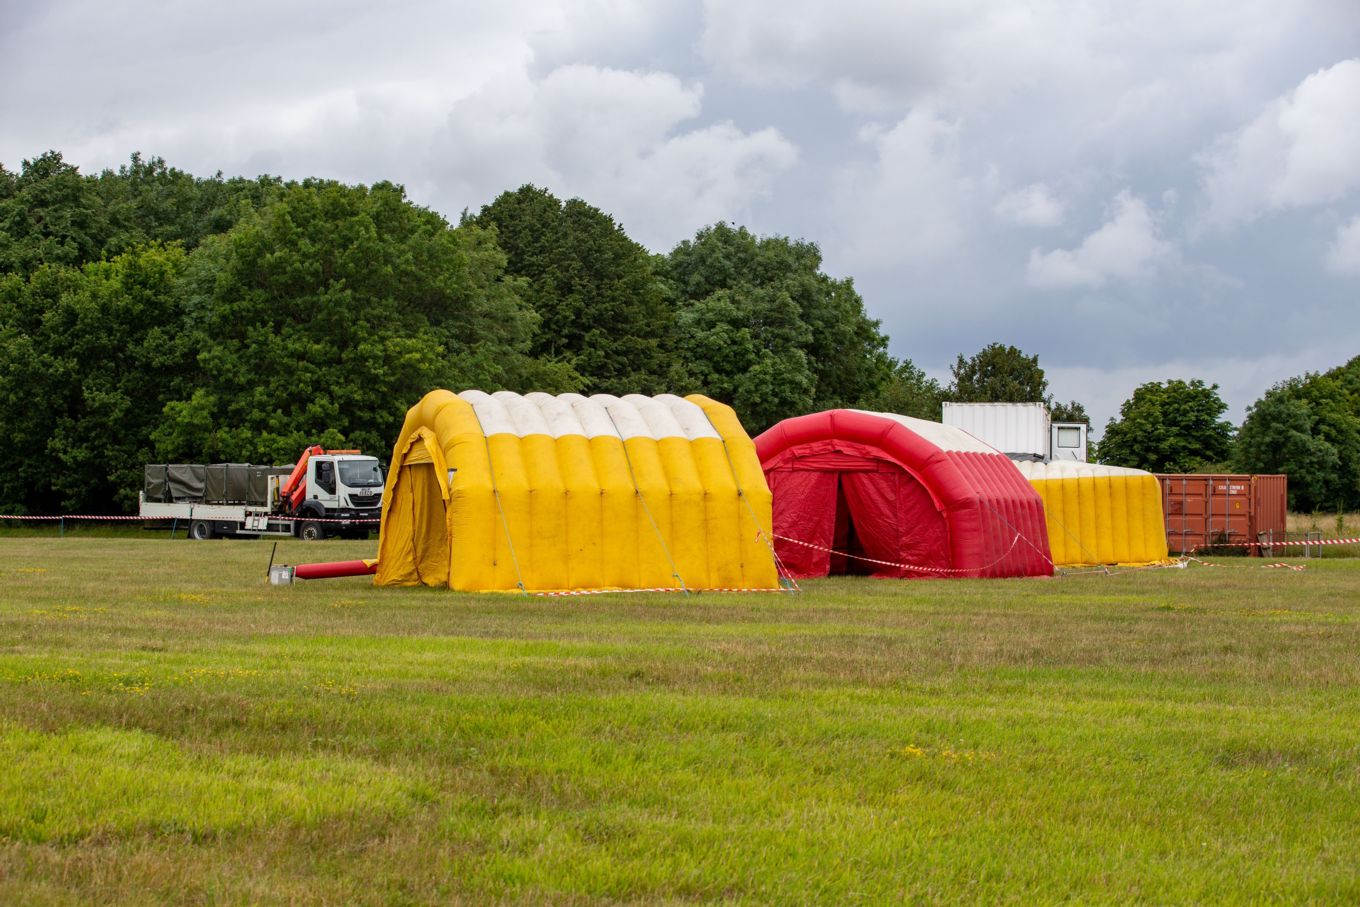 Inflatable tents used to control entry and exit from the crash site